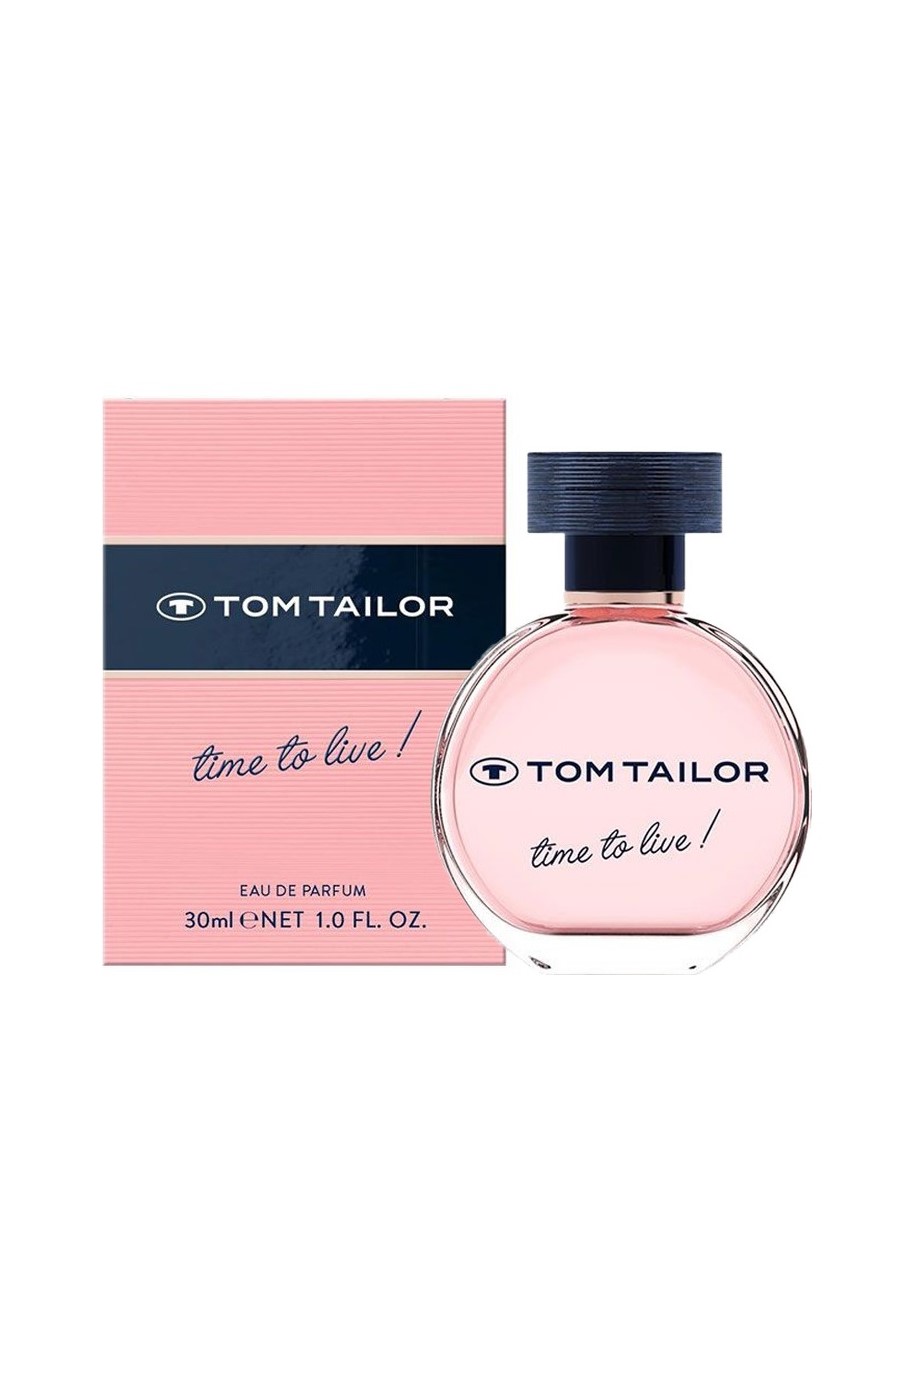 Tom Tailor Time to Live! 30 ml EDP